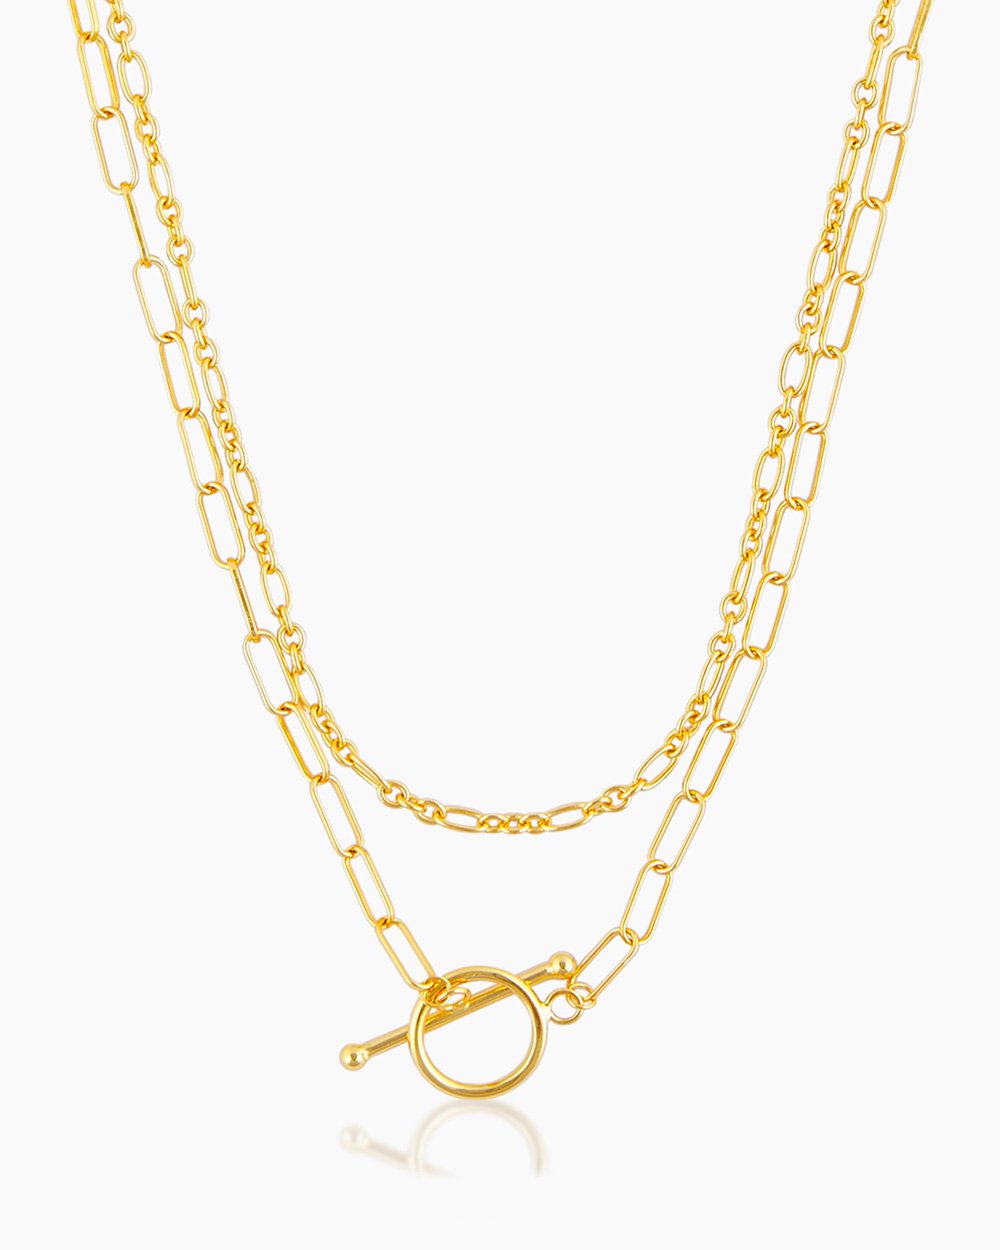 CANBERA CHAIN LOCK NECKLACE 18K GOLD PLATED – Ohparislookbook